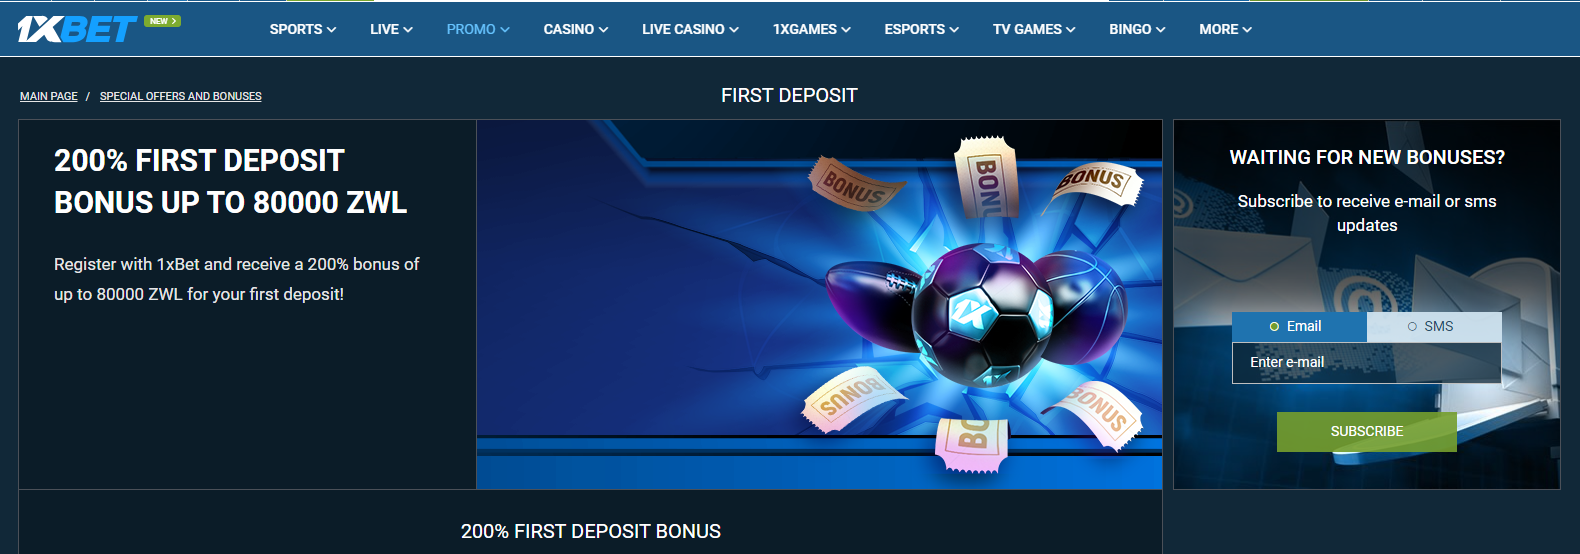 Images show 1xBet Zambia